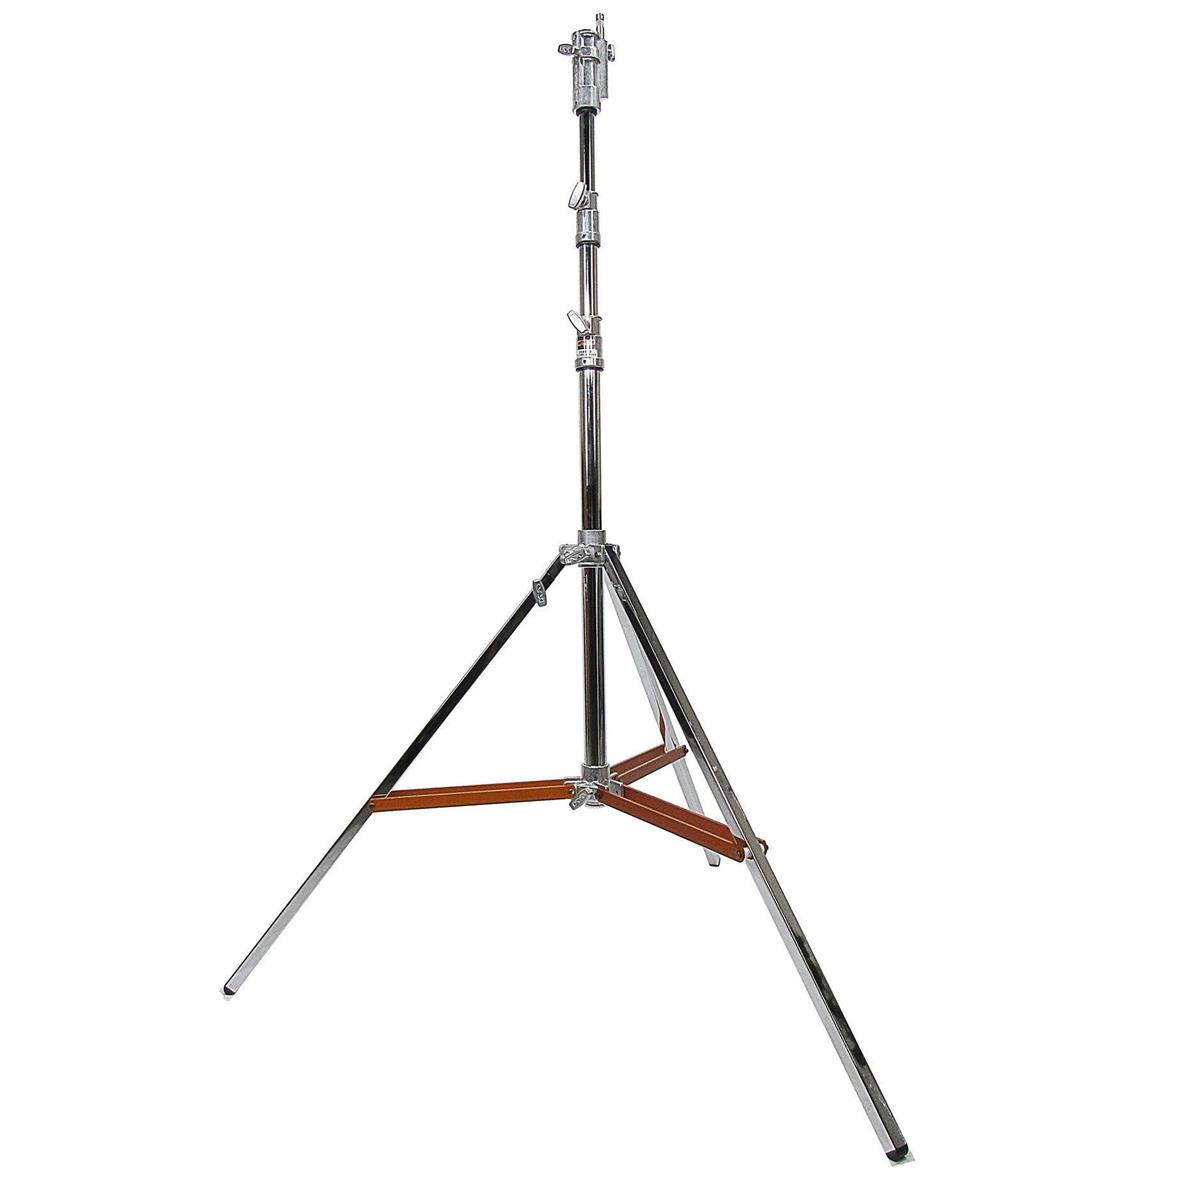 Image of Matthews 11.3' Combo Double Riser Steel Stand with Rocky Mountain Leg